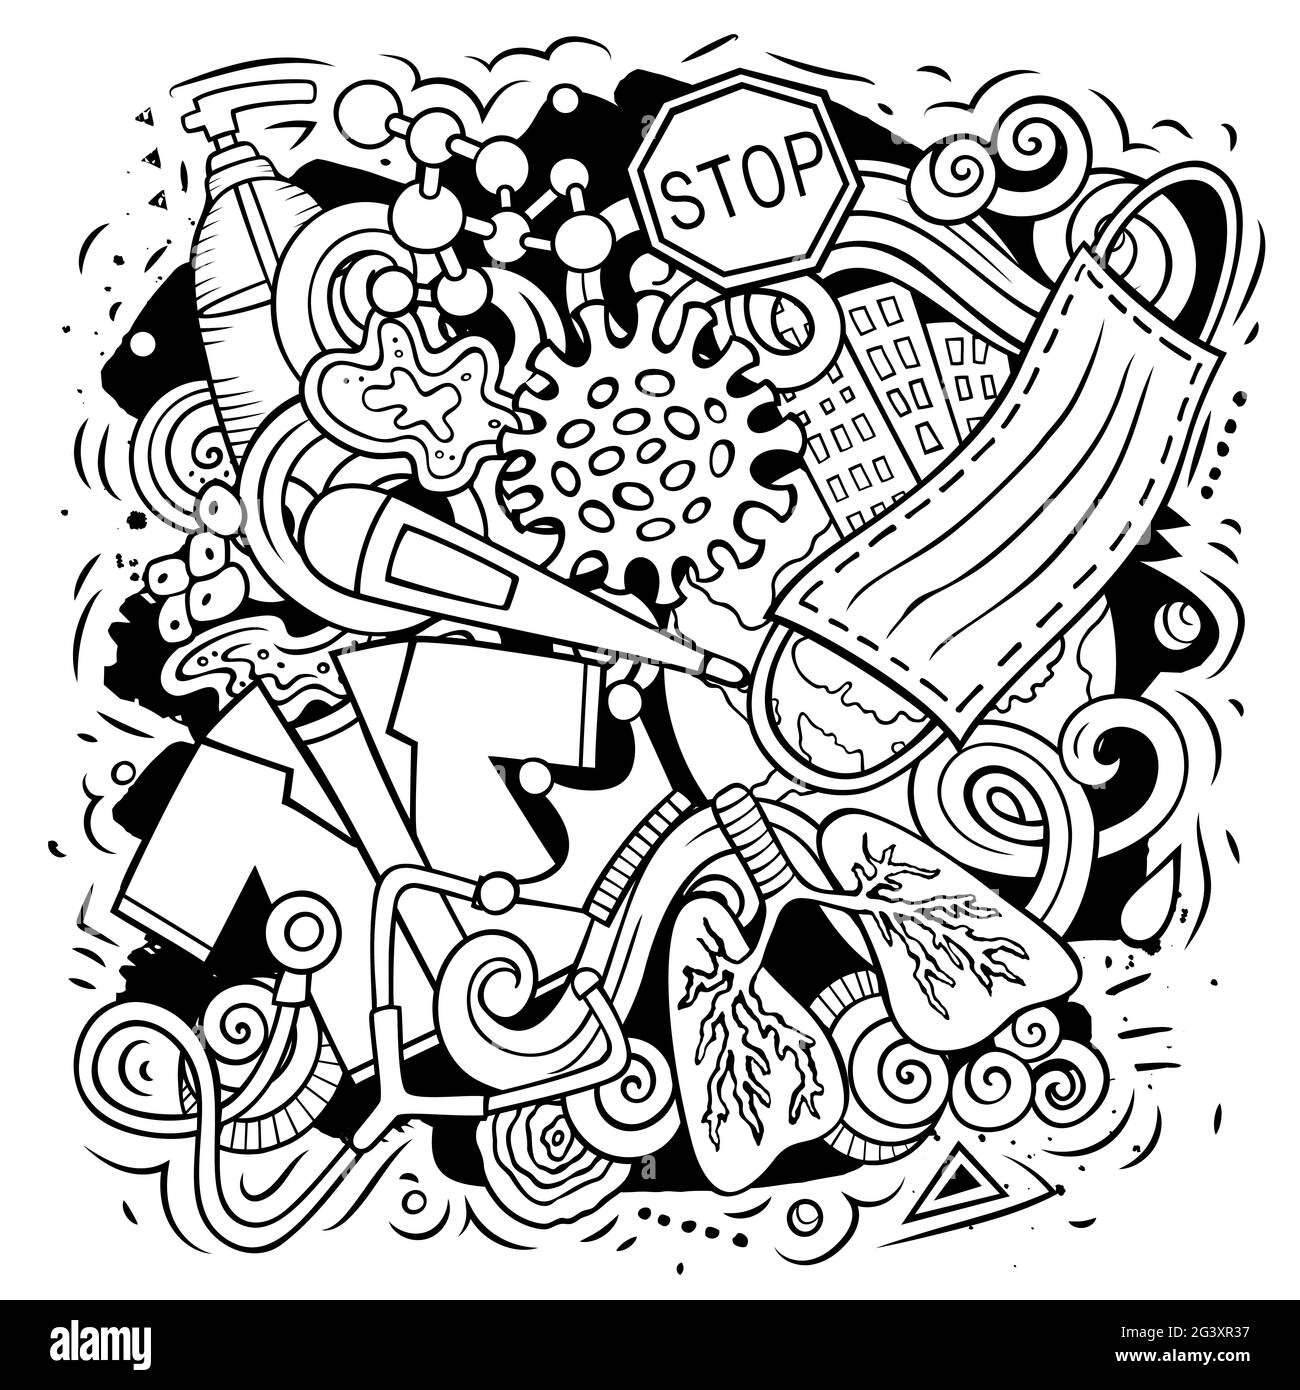 Coronavirus hand drawn cartoon doodles illustration. Creative art vector background with quarantine elements and objects. Sketchy composition Stock Vector